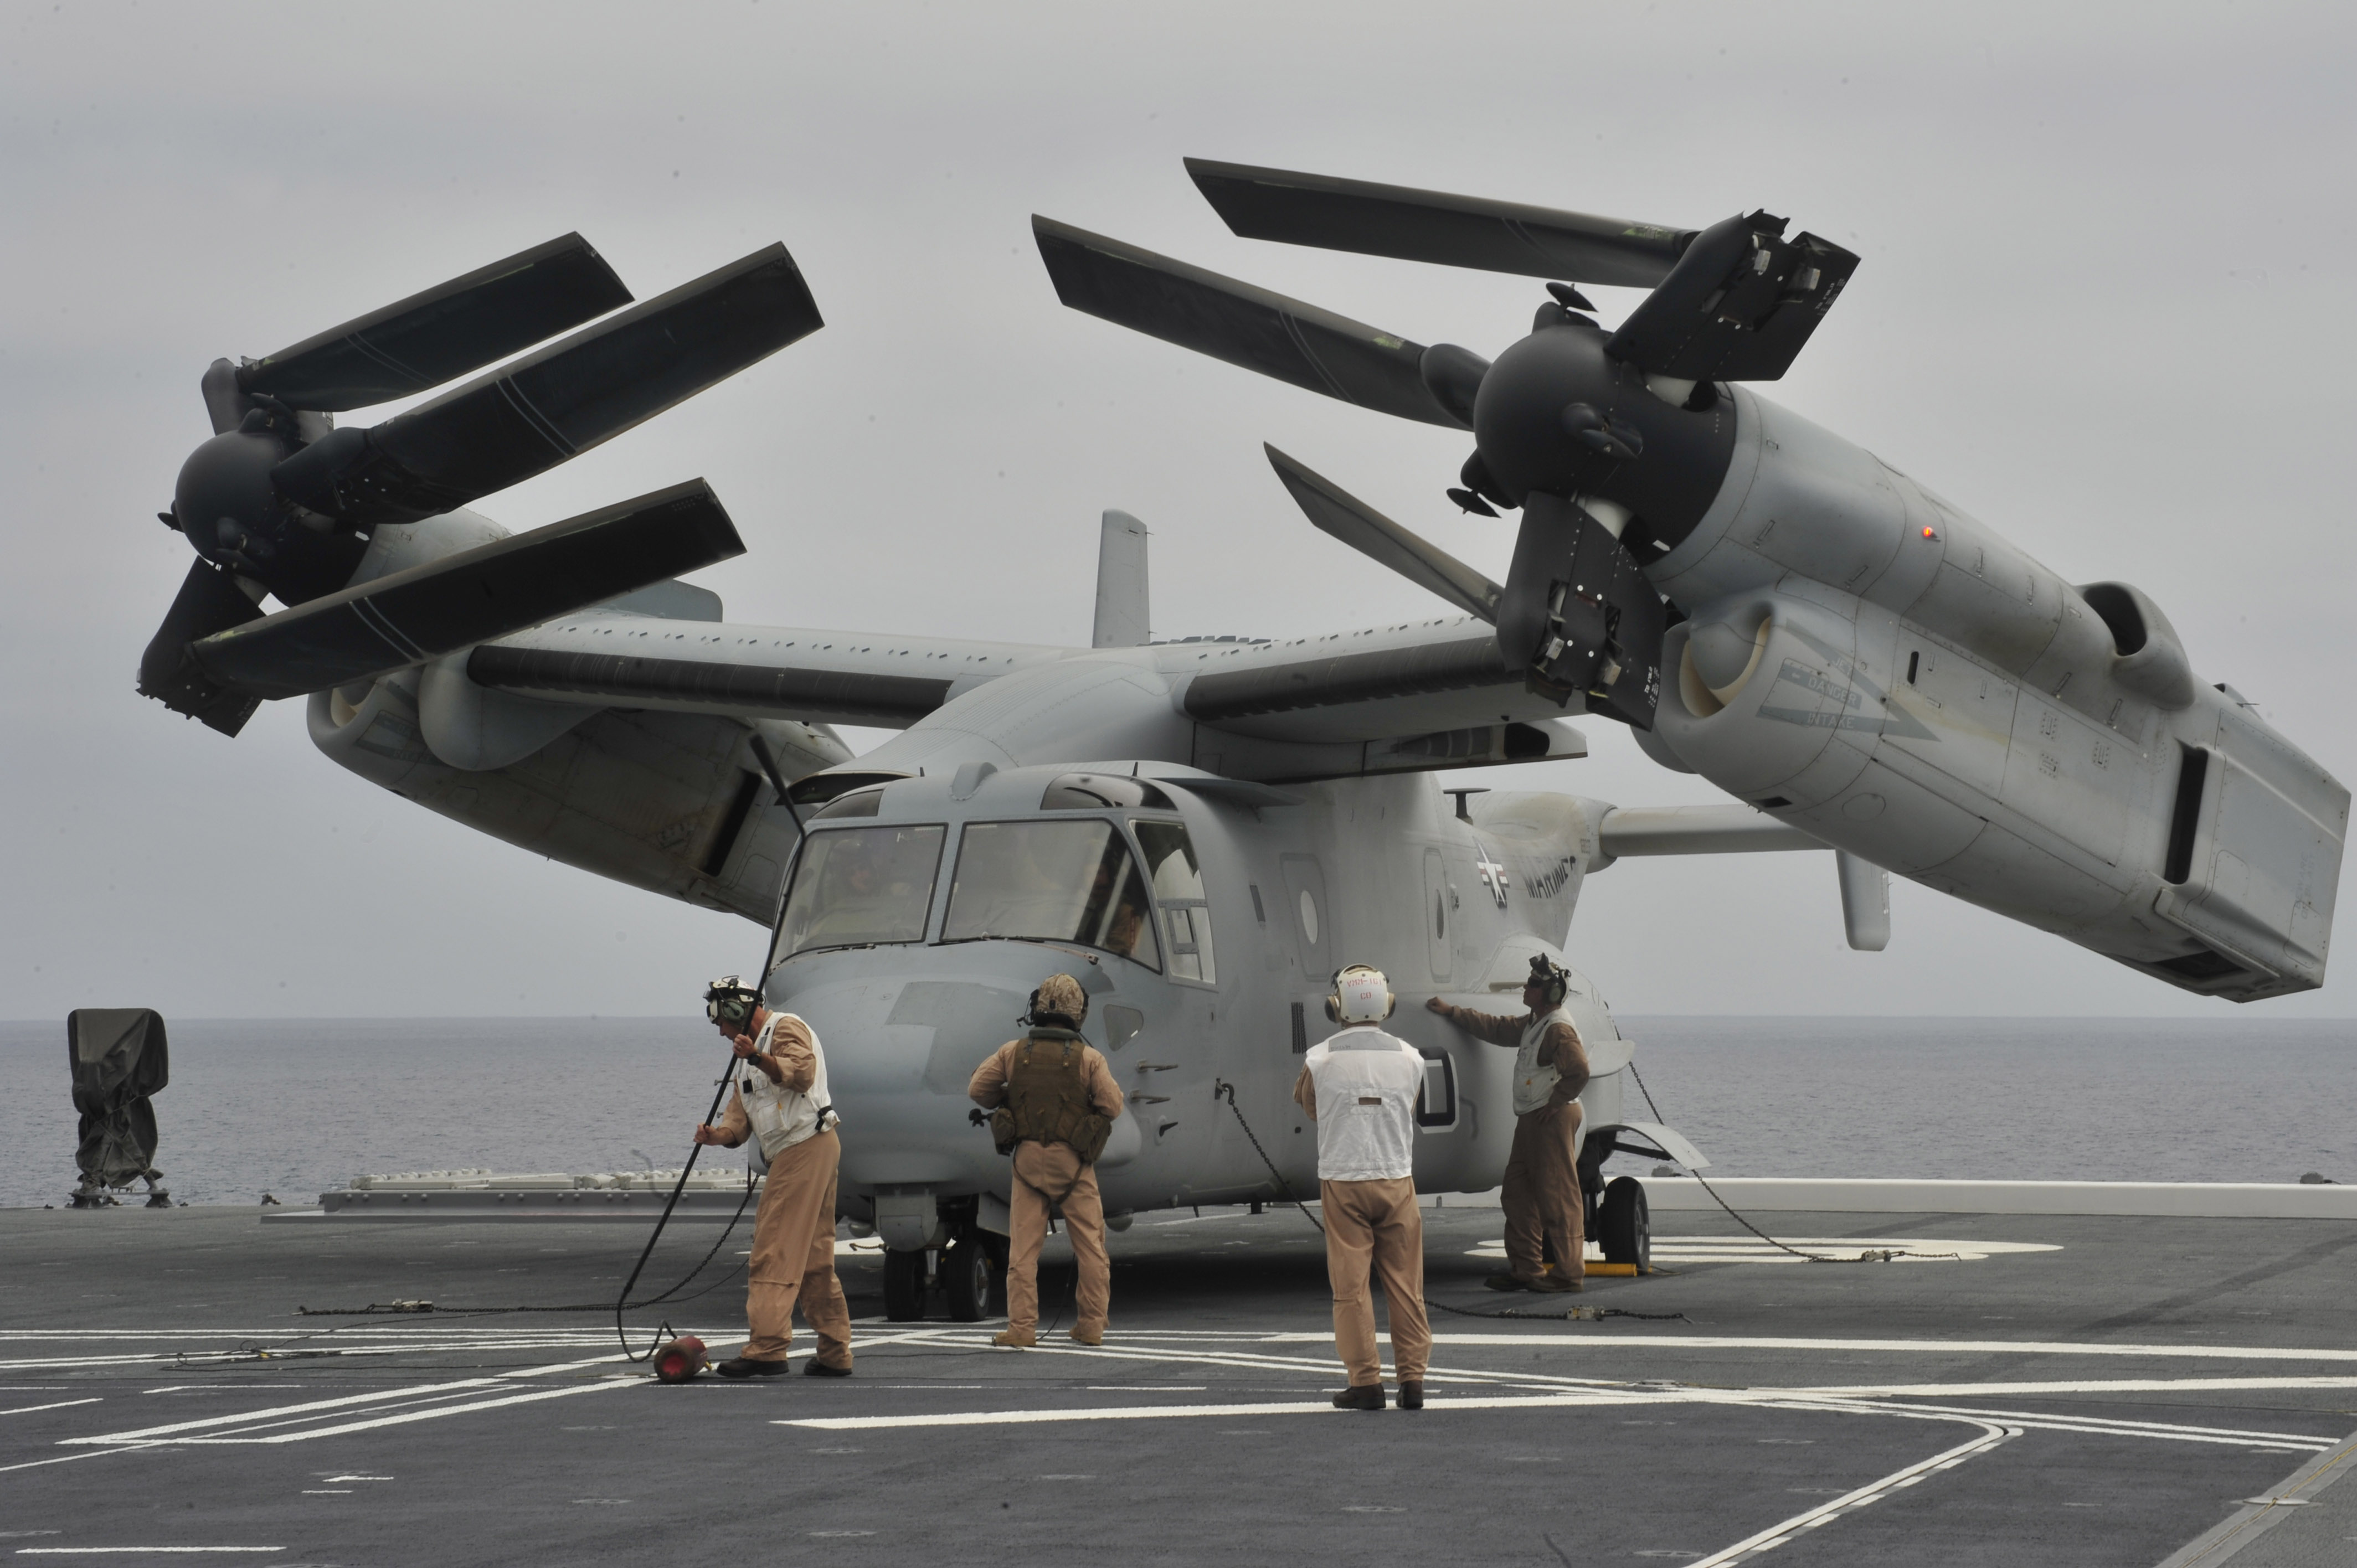 U.S. Marines inspect an MV-22 Osprey tilt-rotor aircraft after landing on the Japan Maritime Self-Defense Force helicopter destroyer JS Hyuga (DDH 181) during amphibious exercise Dawn Blitz 2014. US Navy photo.